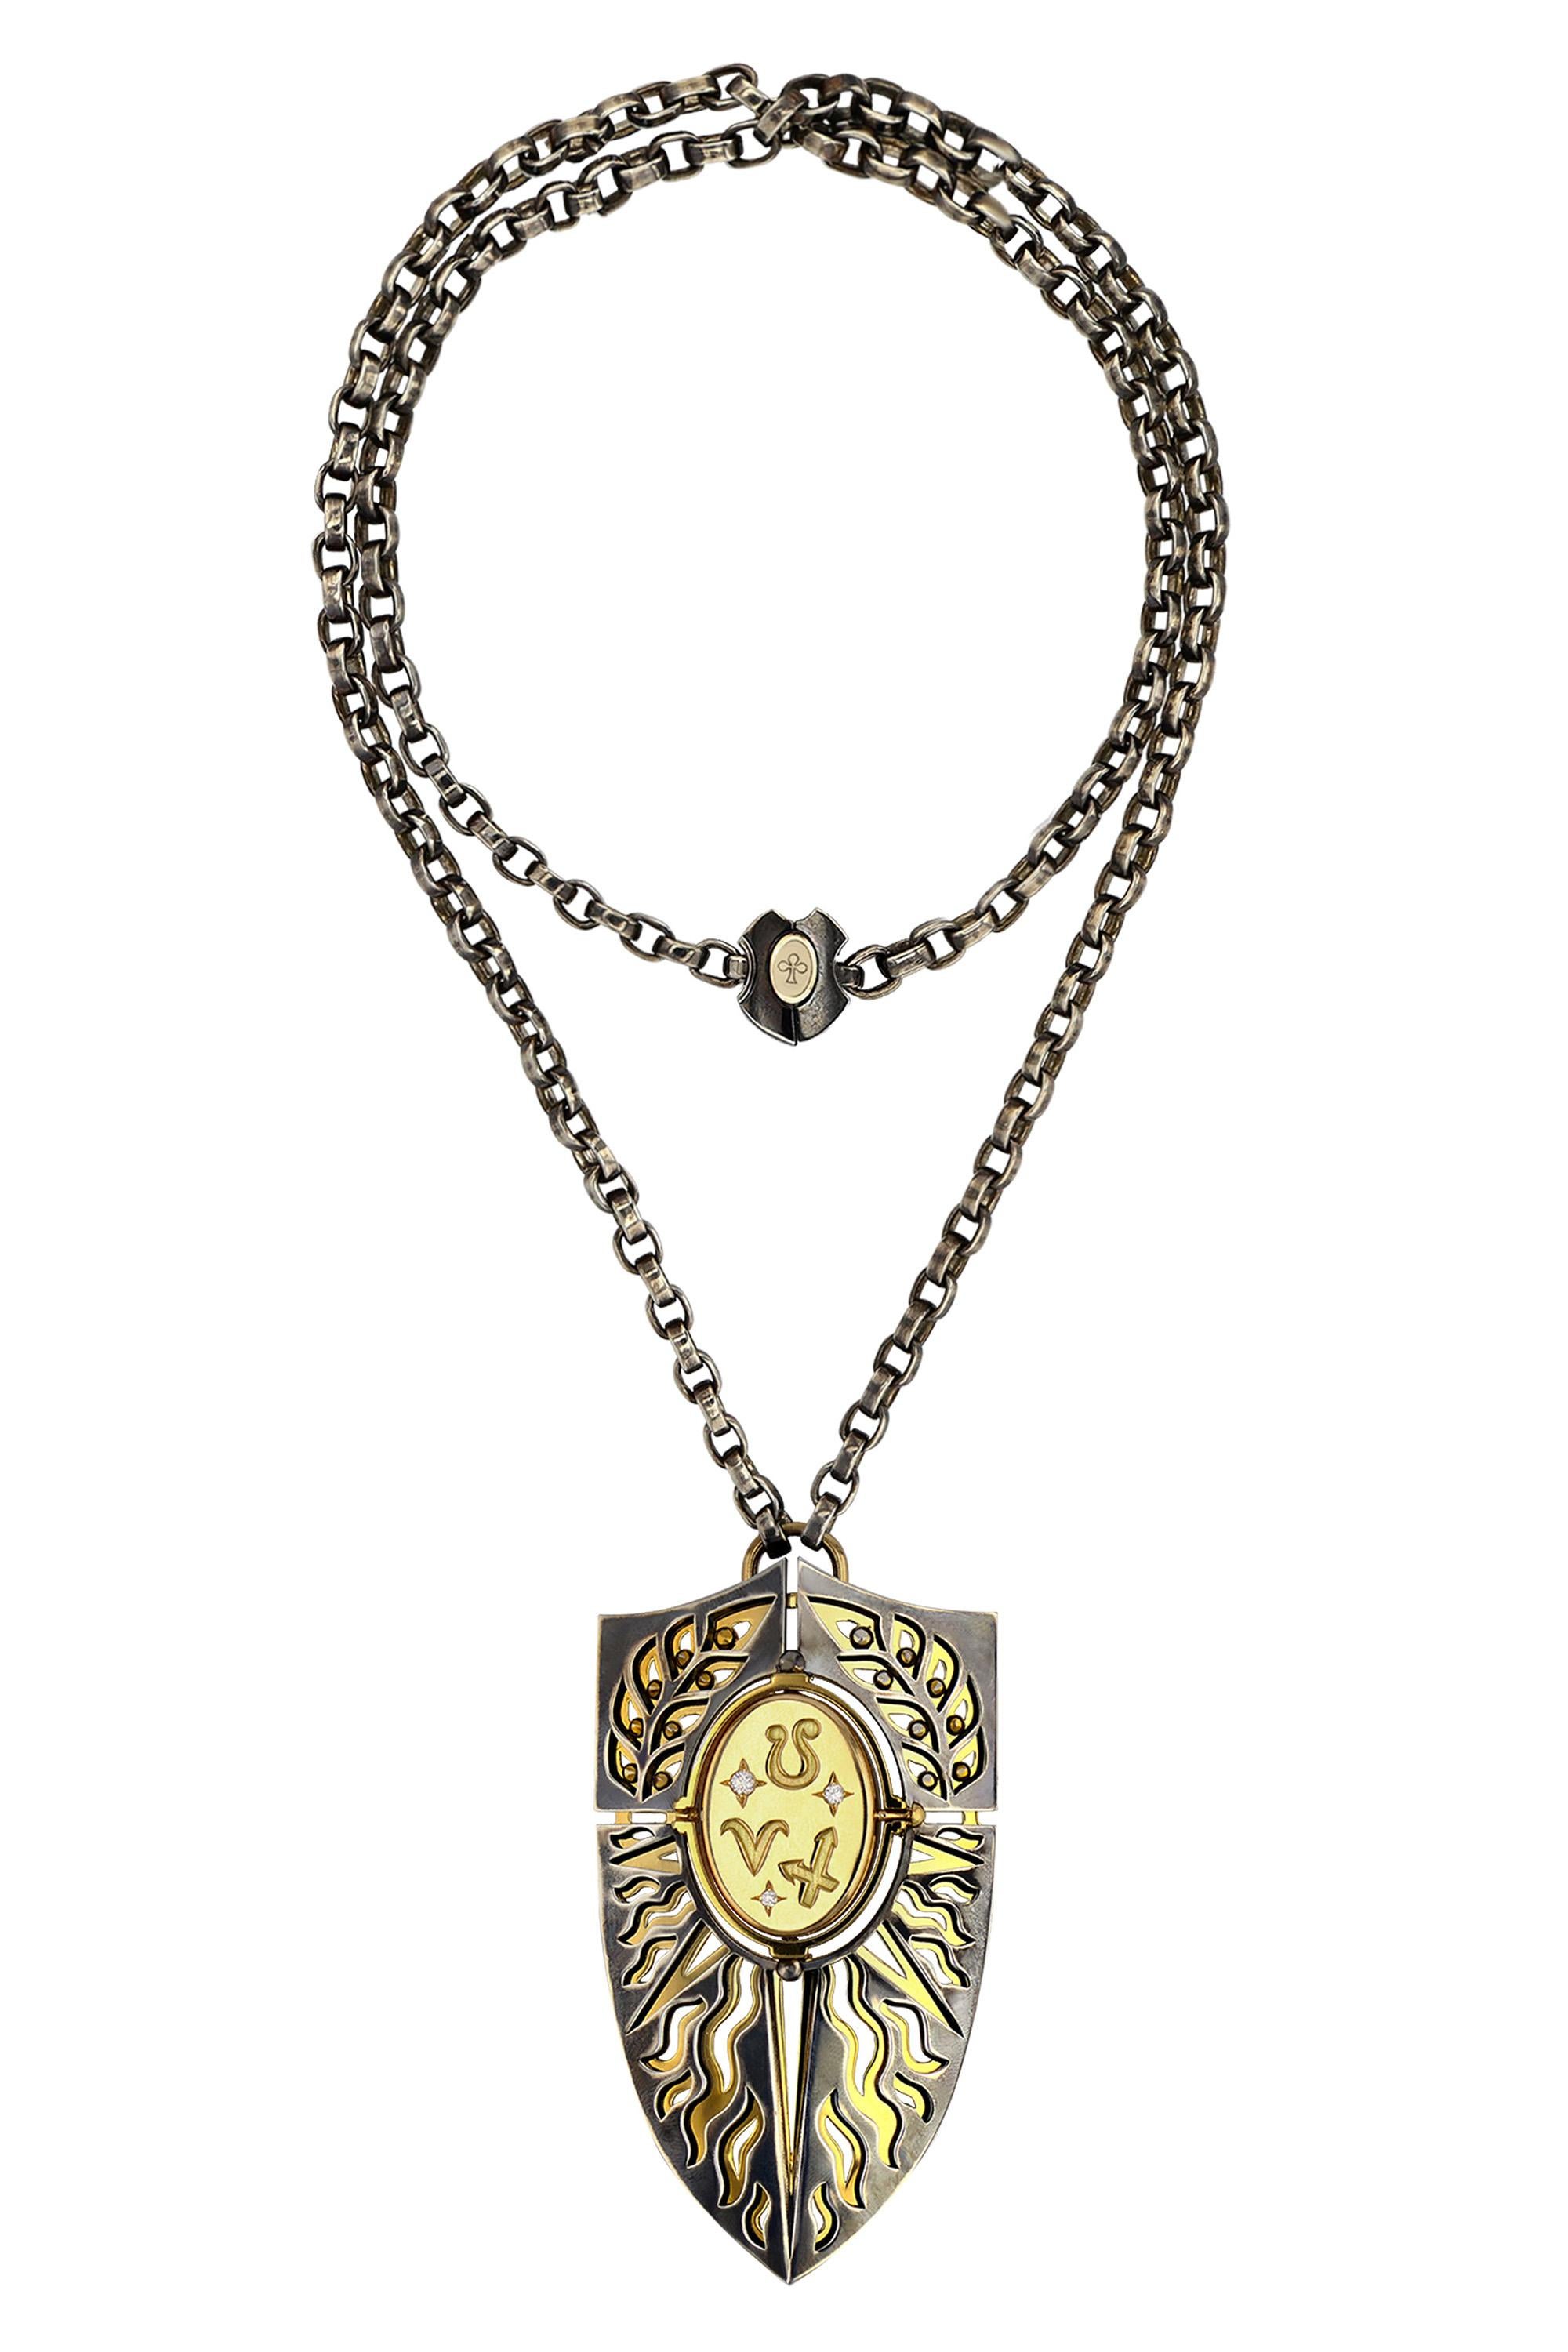 Yellow gold and distressed silver pendant. Rotating medallion: the signs of Fire (Aries, Leo, Sagittarius) engraved on the gold and on the carnelian, a salamander.

Distressed silver chain. 

Details:
Carnelian
3 Diamonds: 0.1 cts
18k Yellow Gold: